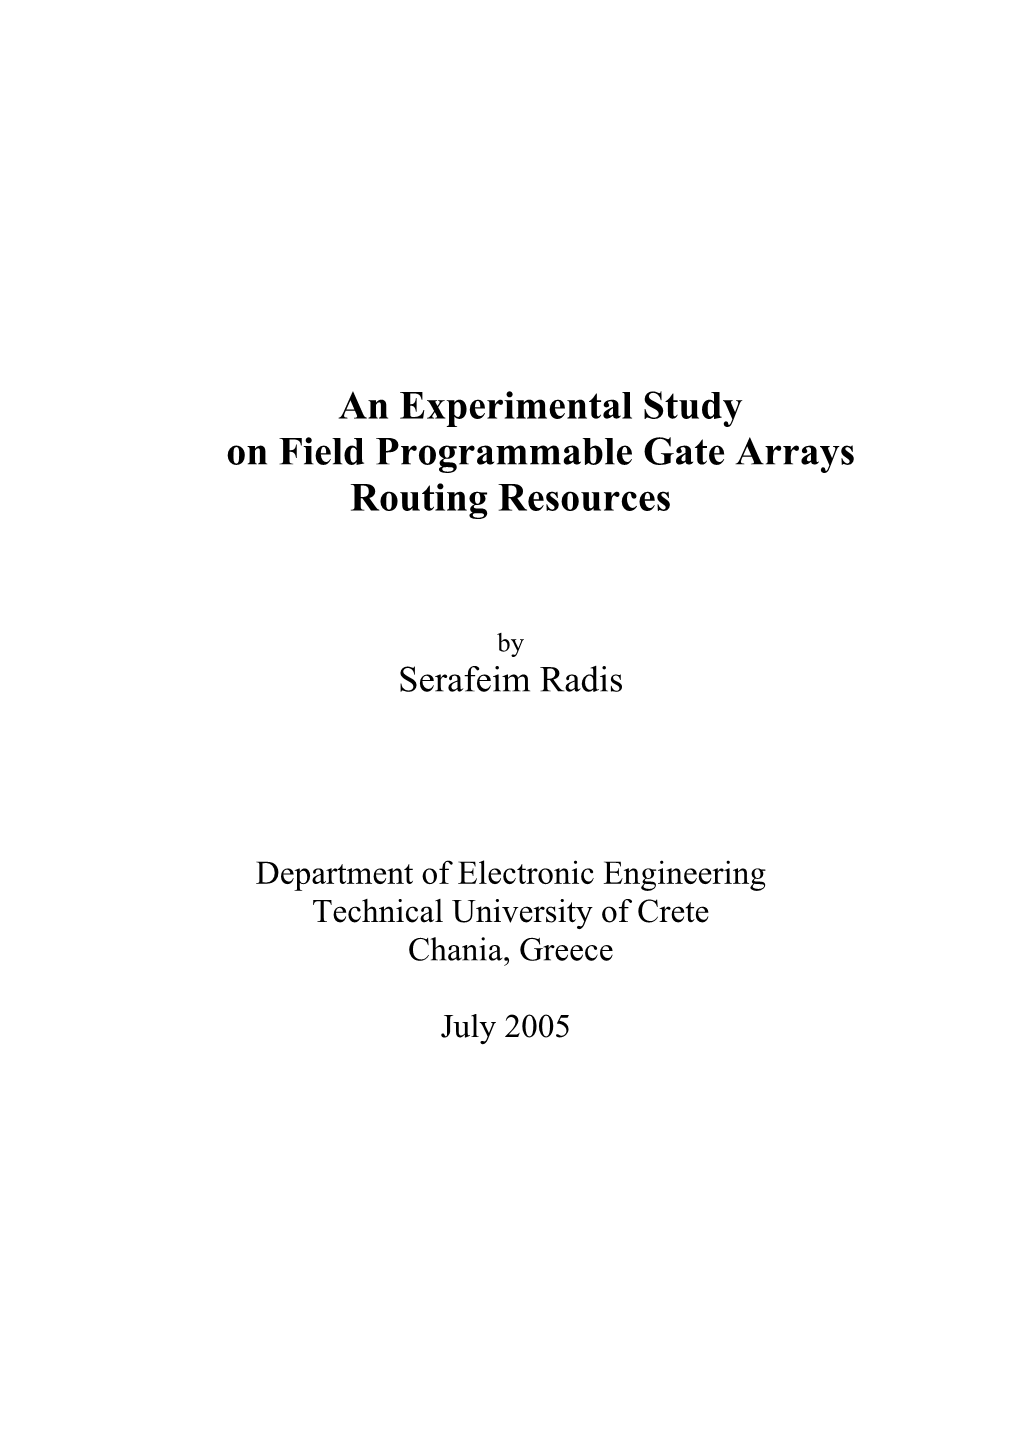 An Experimental Study on Field Programmable Gate Arrays Routing Resources